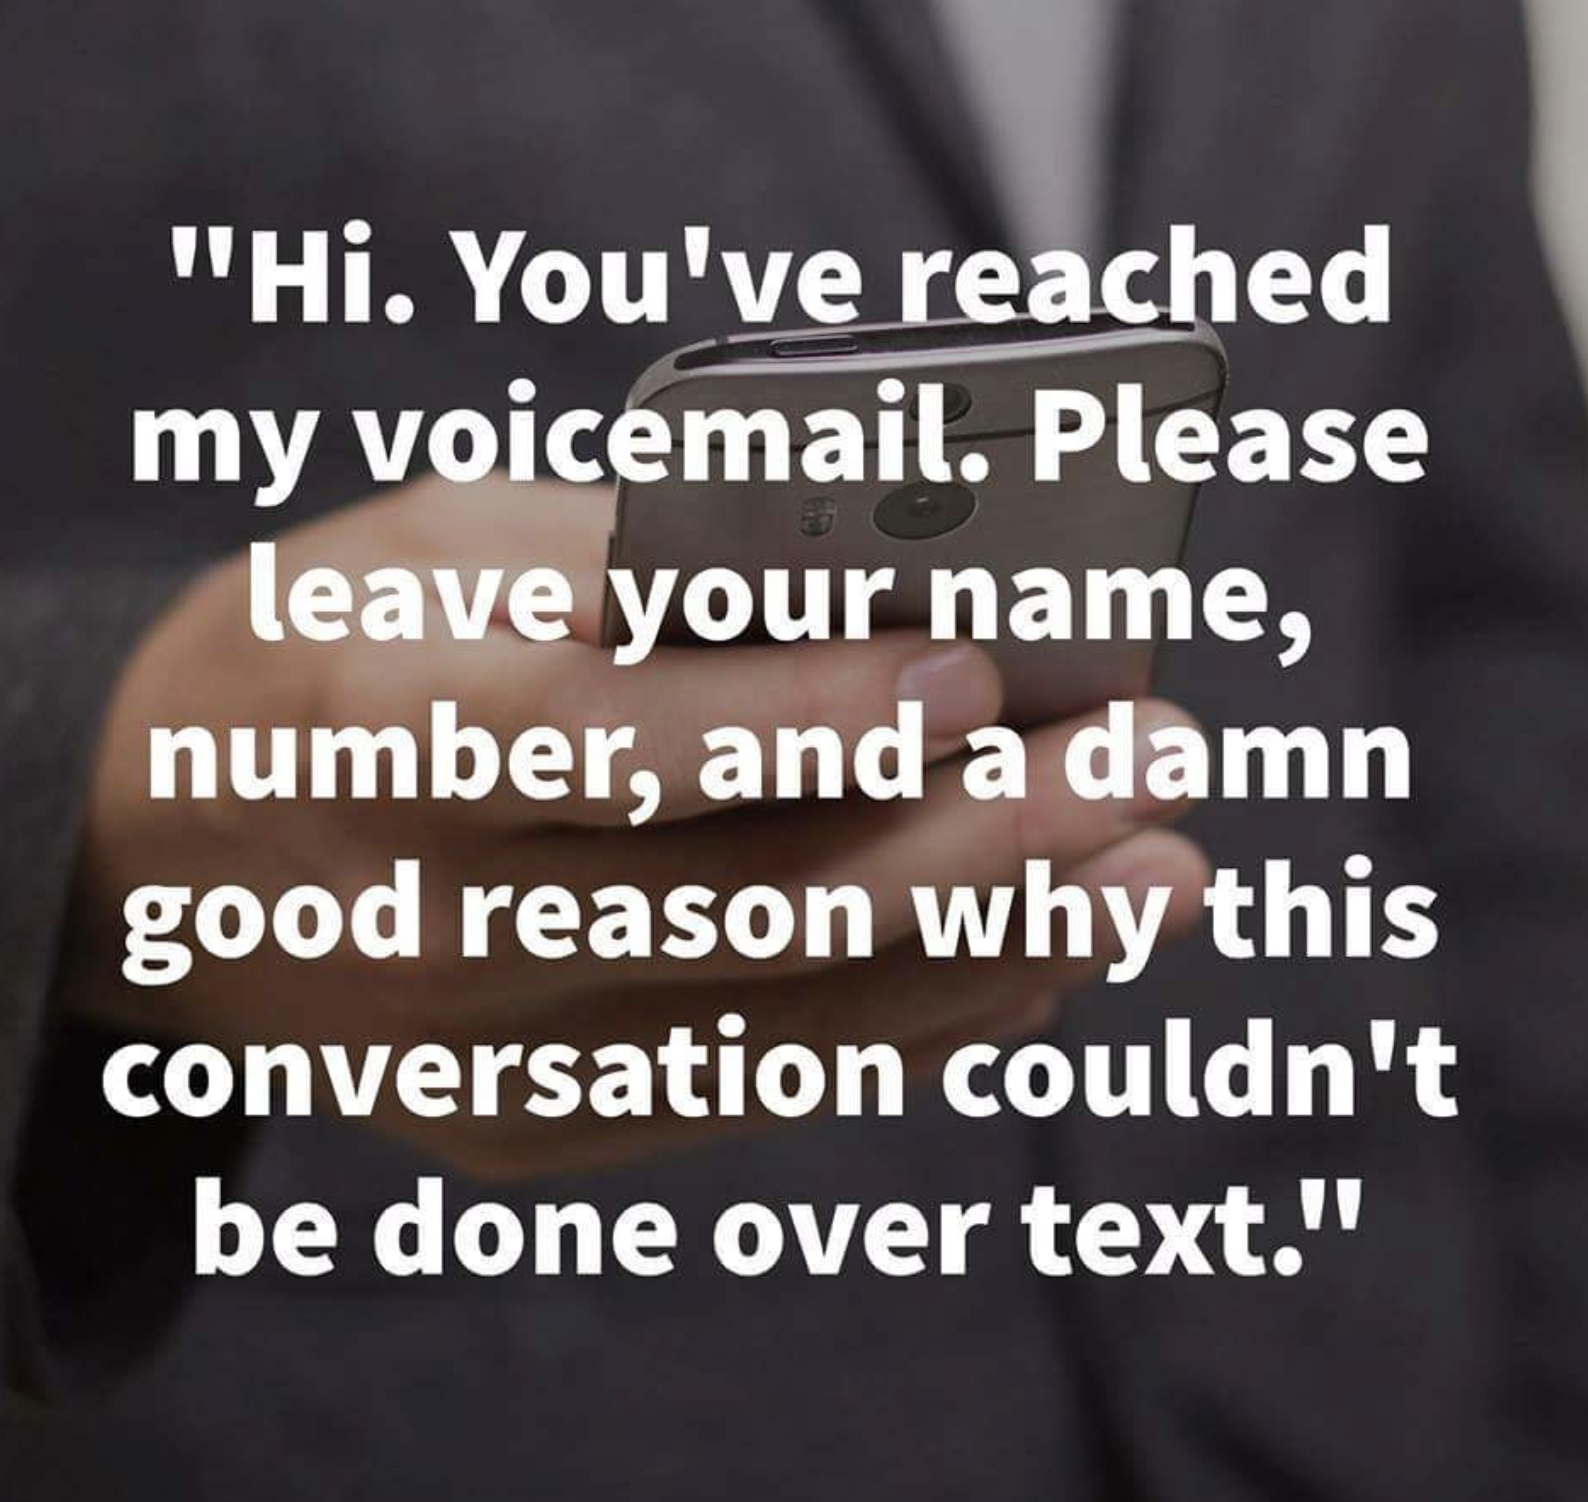 don t call my phone quotes - "Hi. You've reached my voicemail. Please leave your name, number, and a damn good reason why this conversation couldn't be done over text."